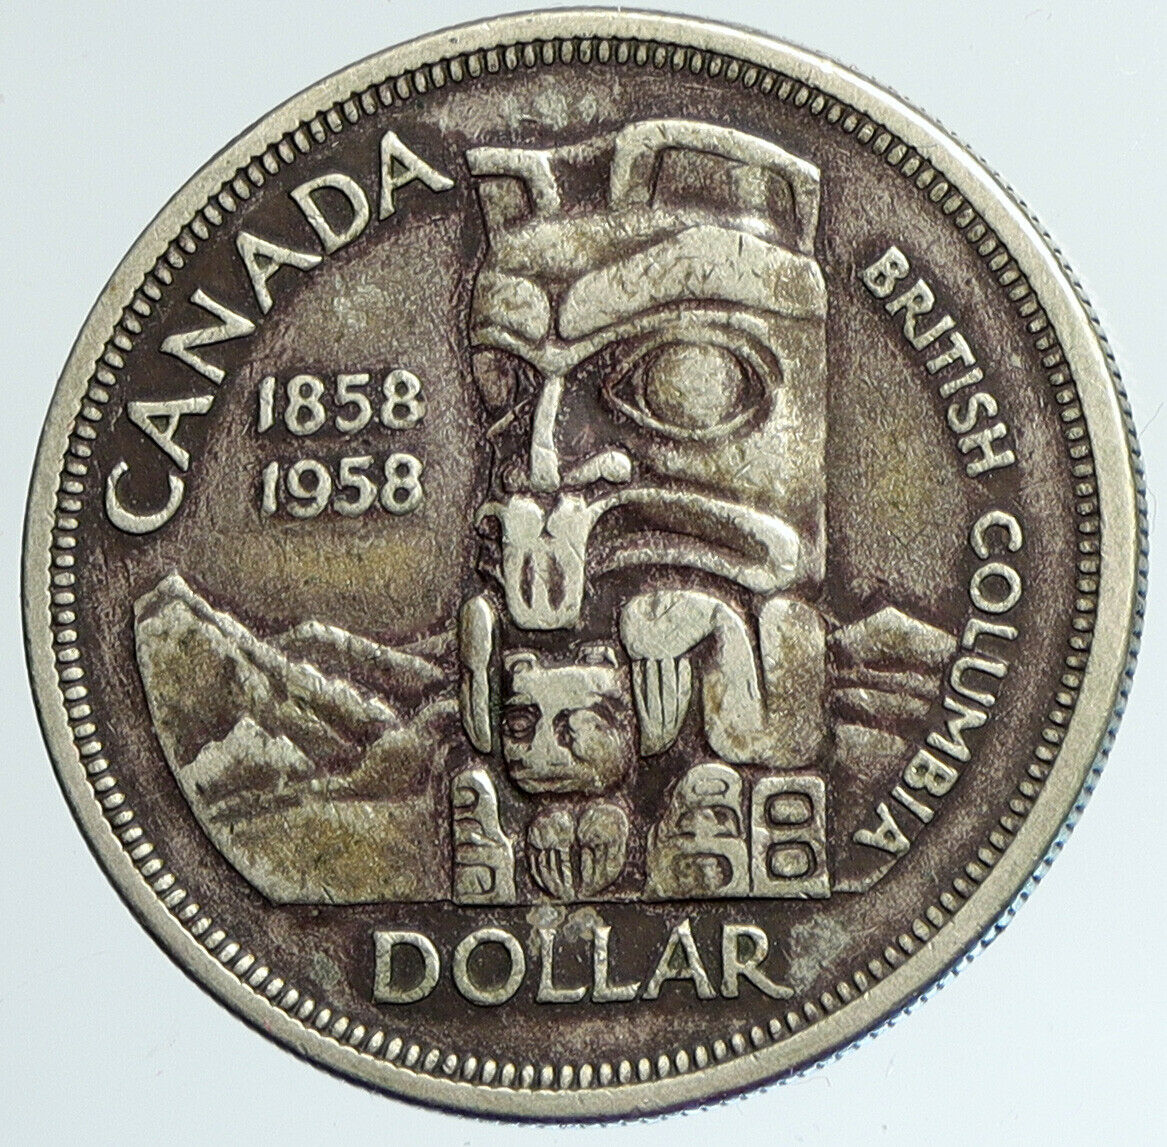 1958 CANADA British Columbia Centennial Totem Pole Large OLD Silver Coin i111664